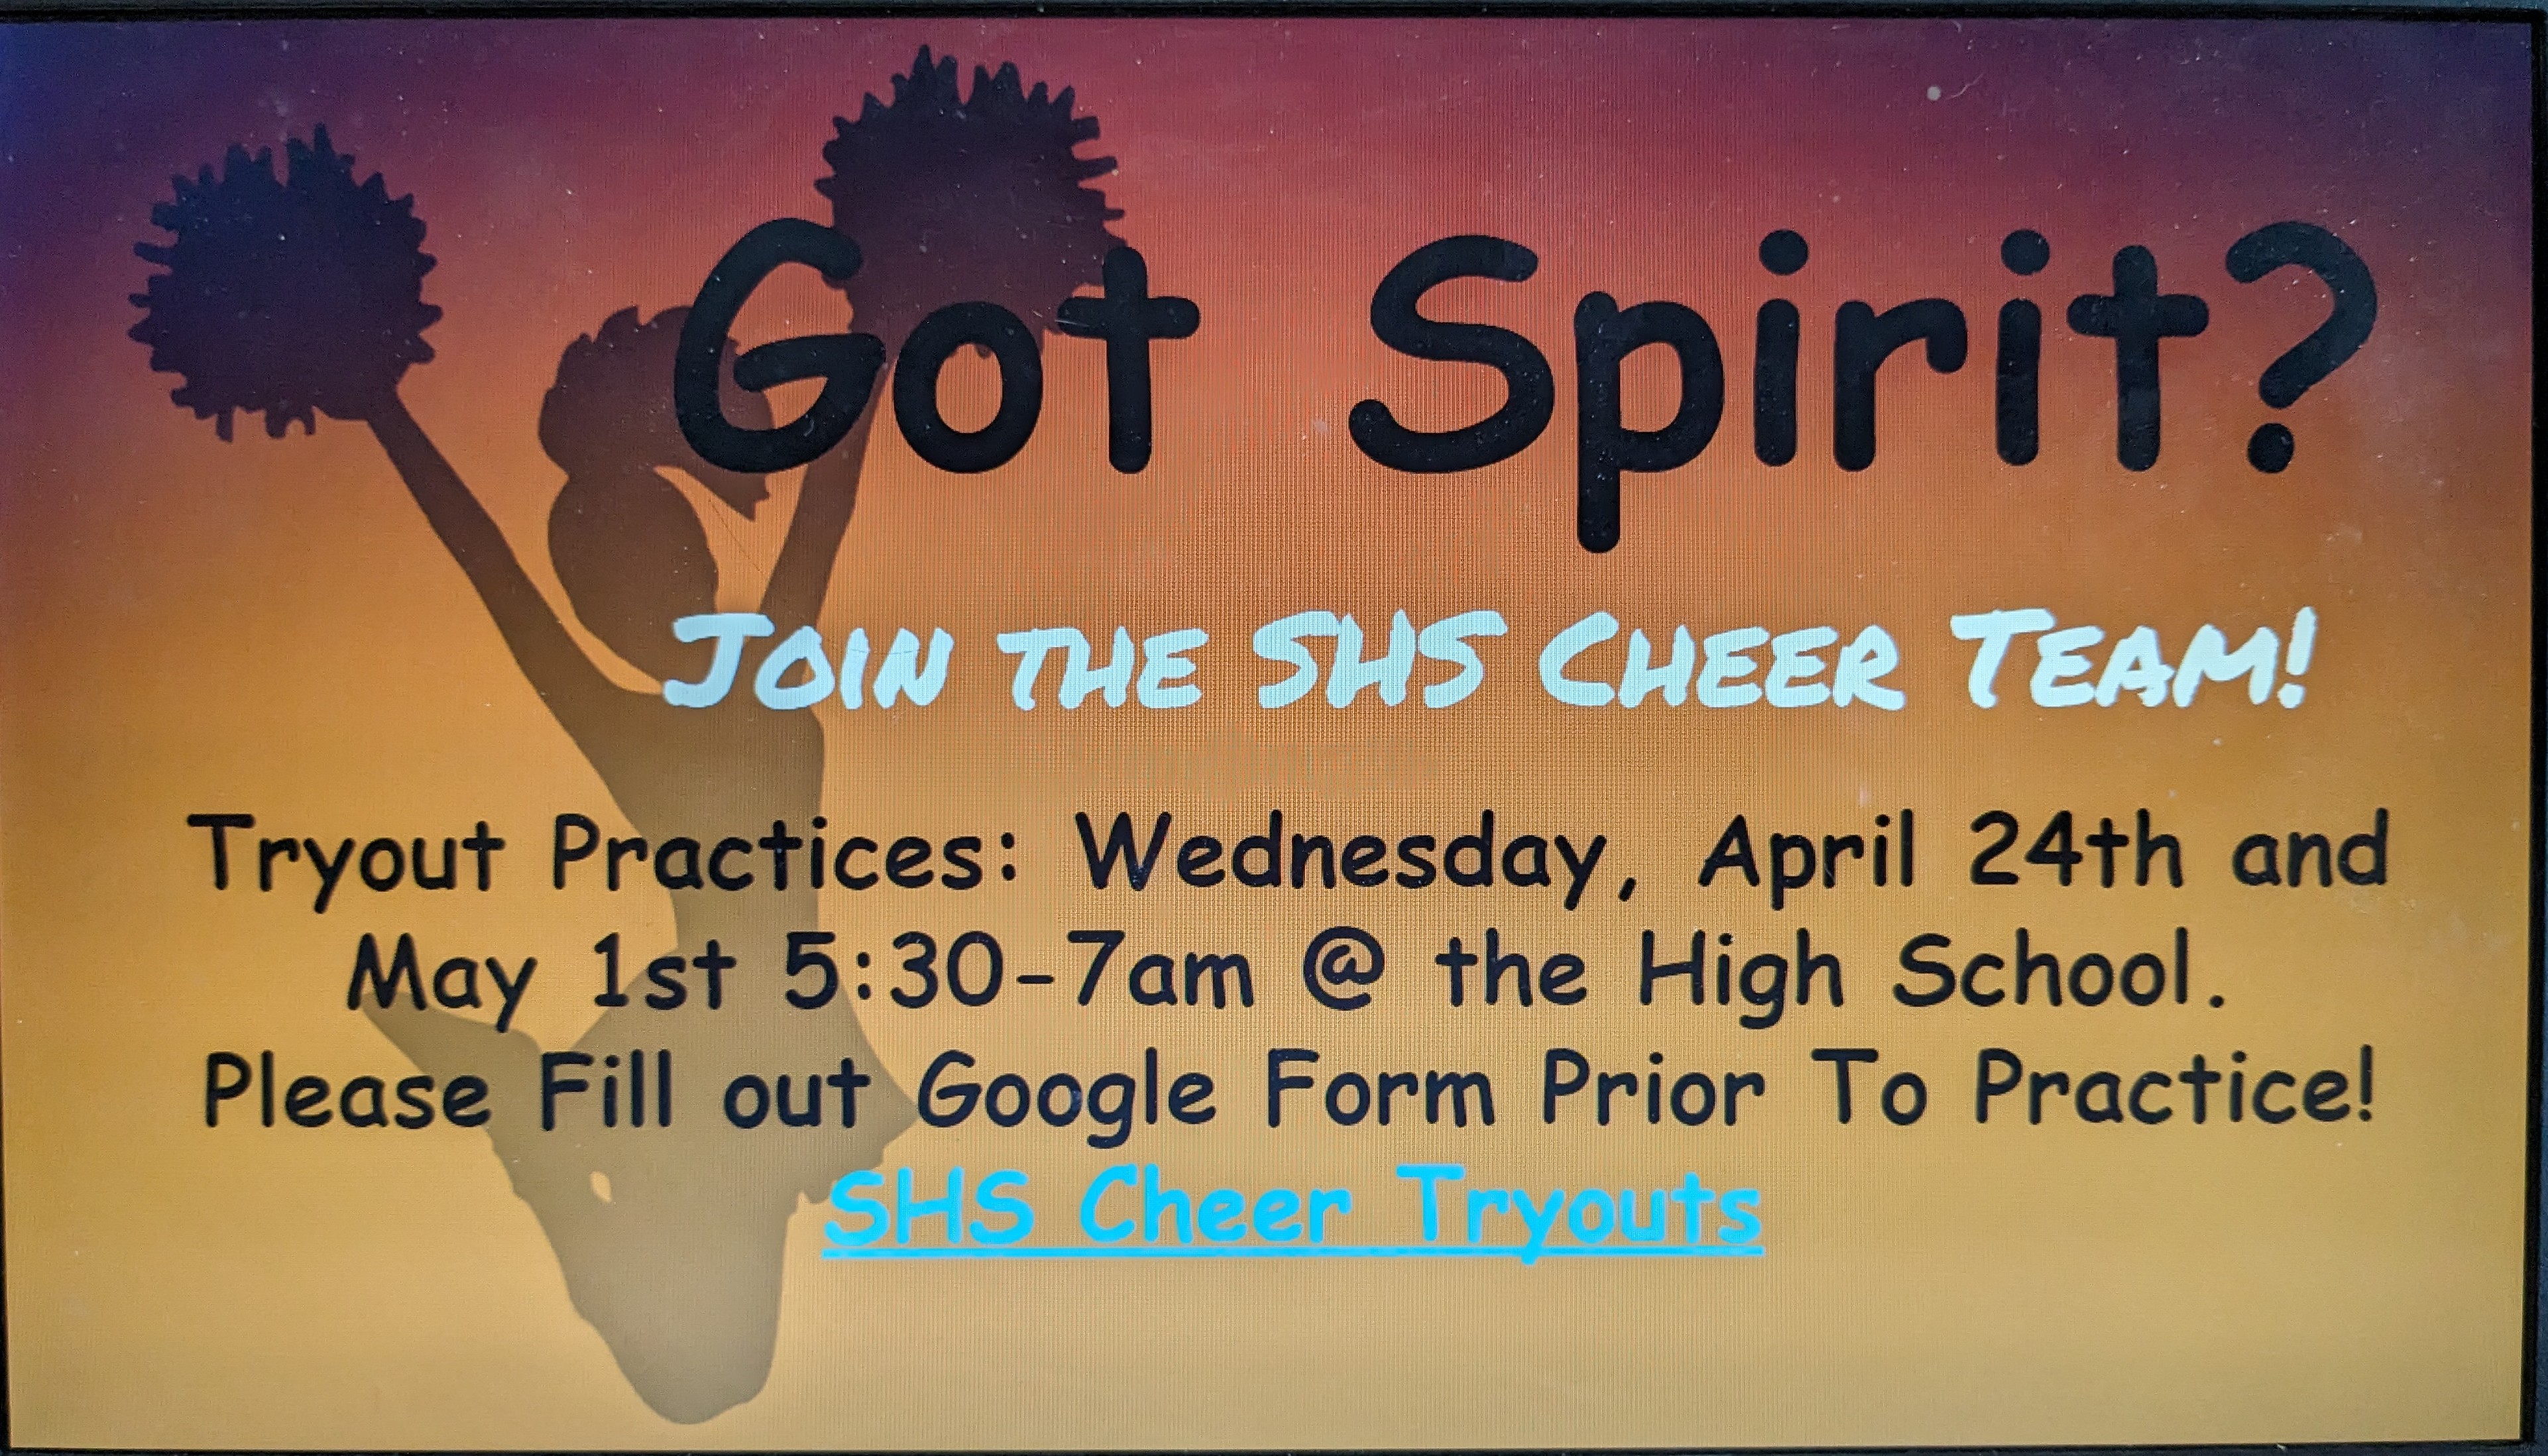 https://springville.k12.ia.us/files/cheer_tryouts_65557.png